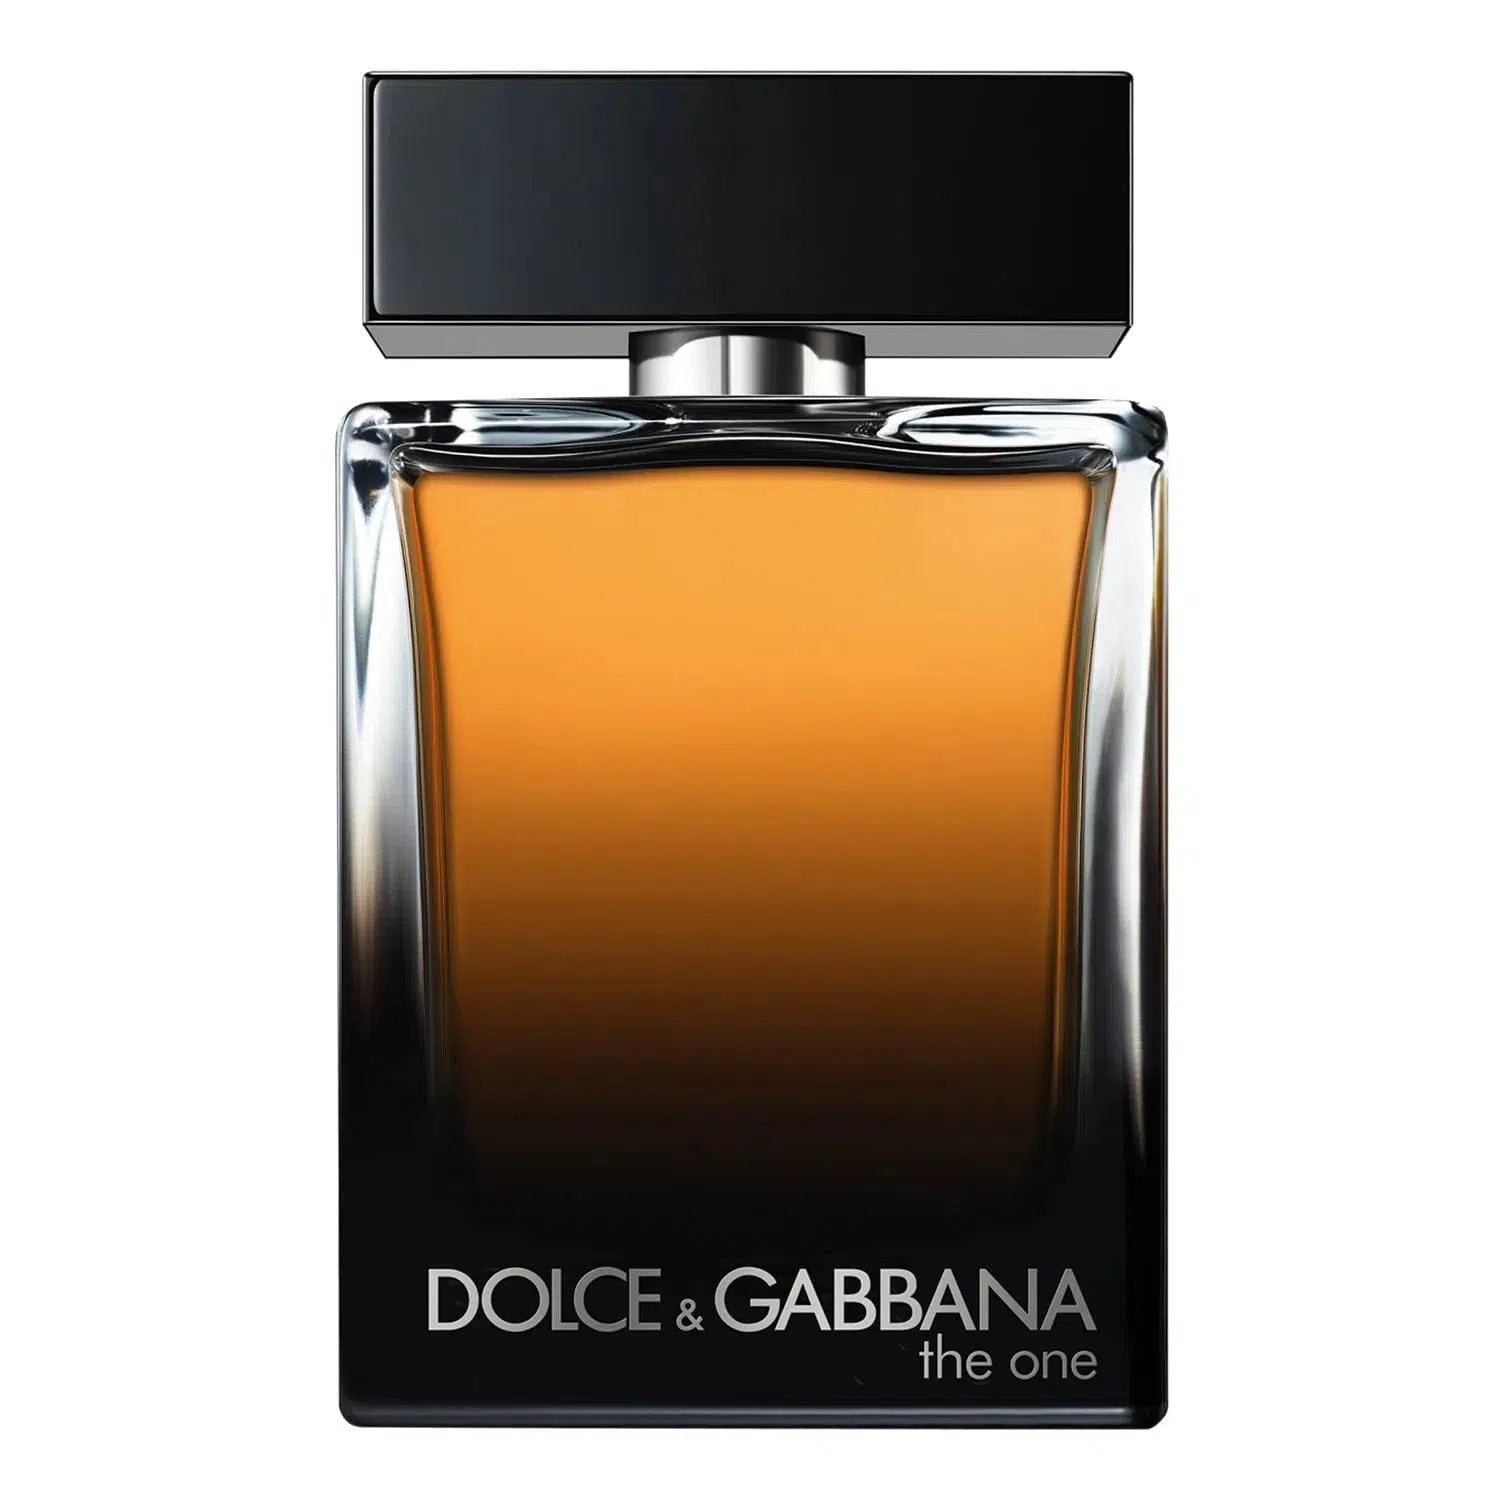 Buy Dolce & Gabbana The One Men EDP 100ml for P5195.00 Only!